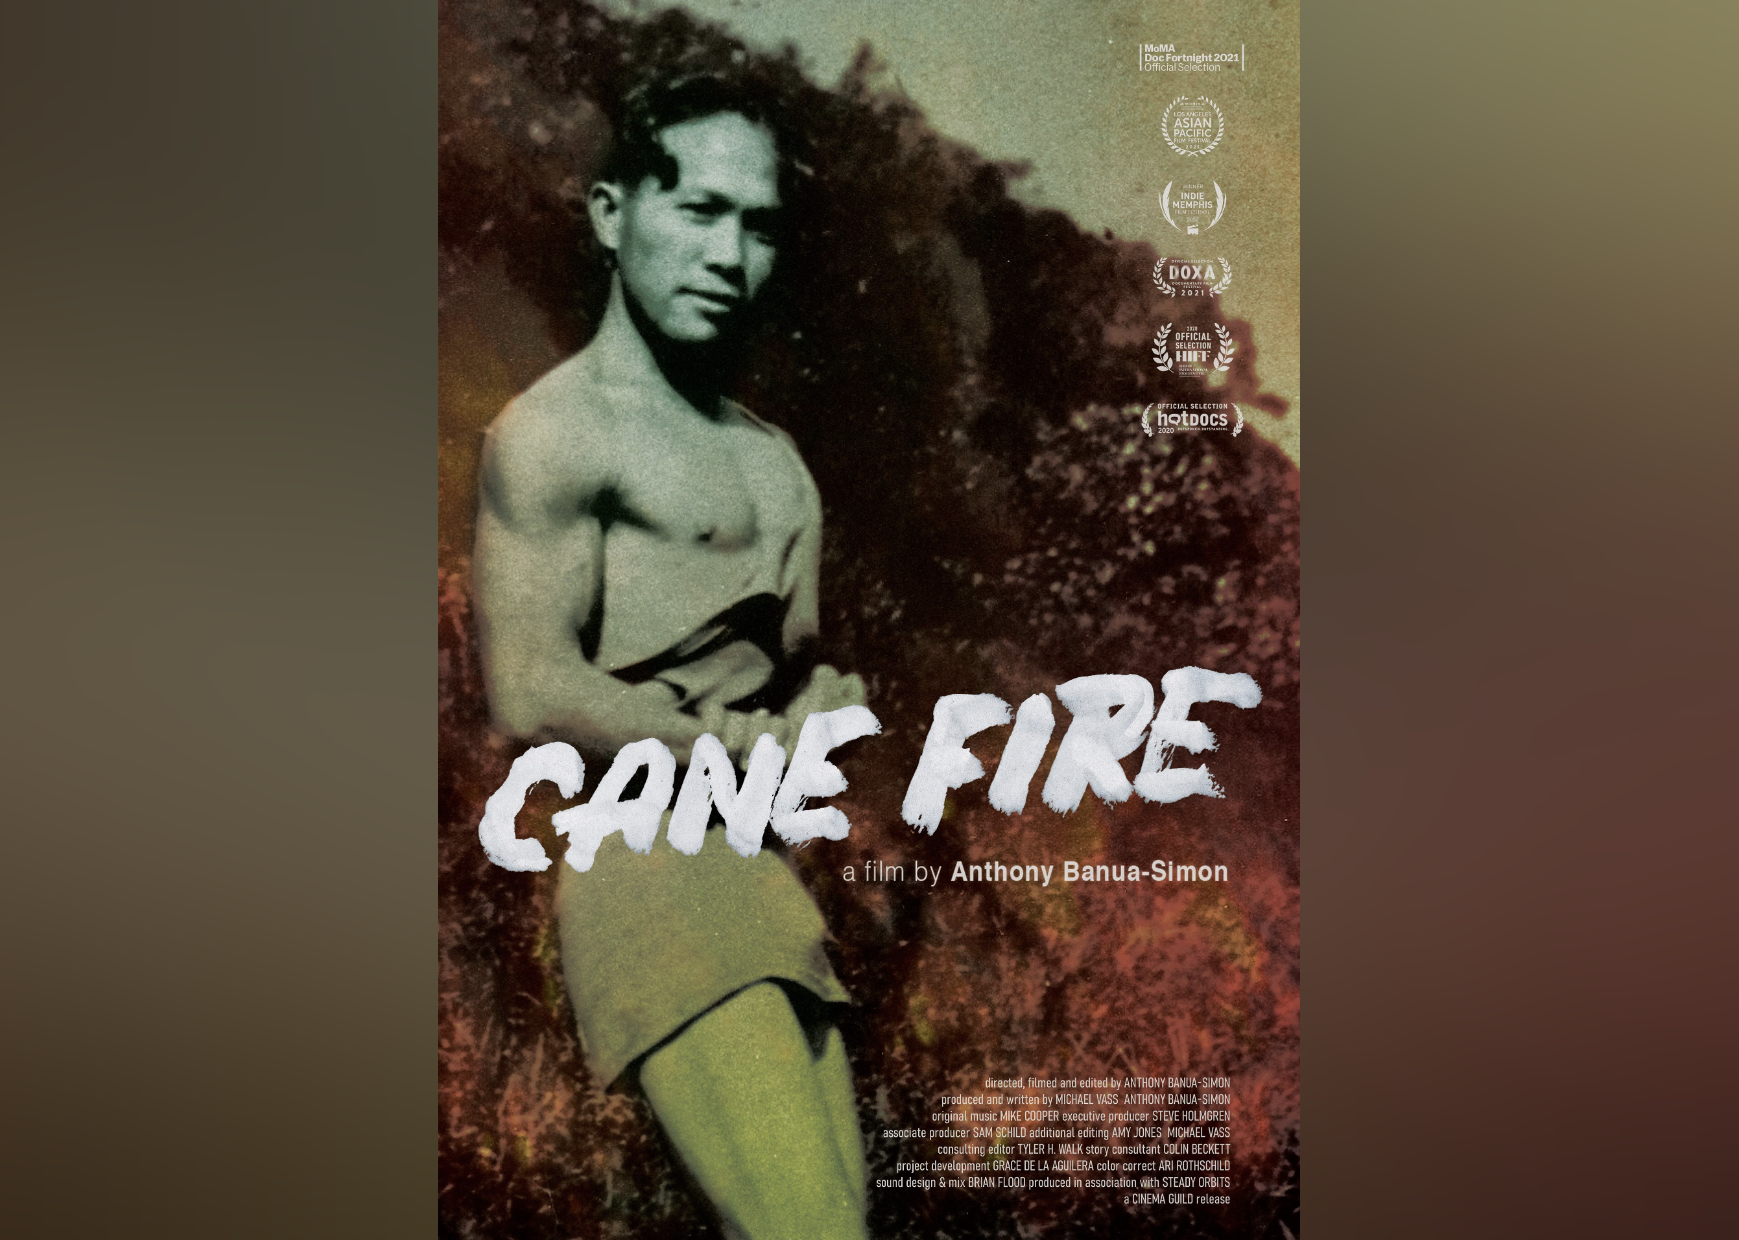 The promotional poster for the film "Cane Fire".